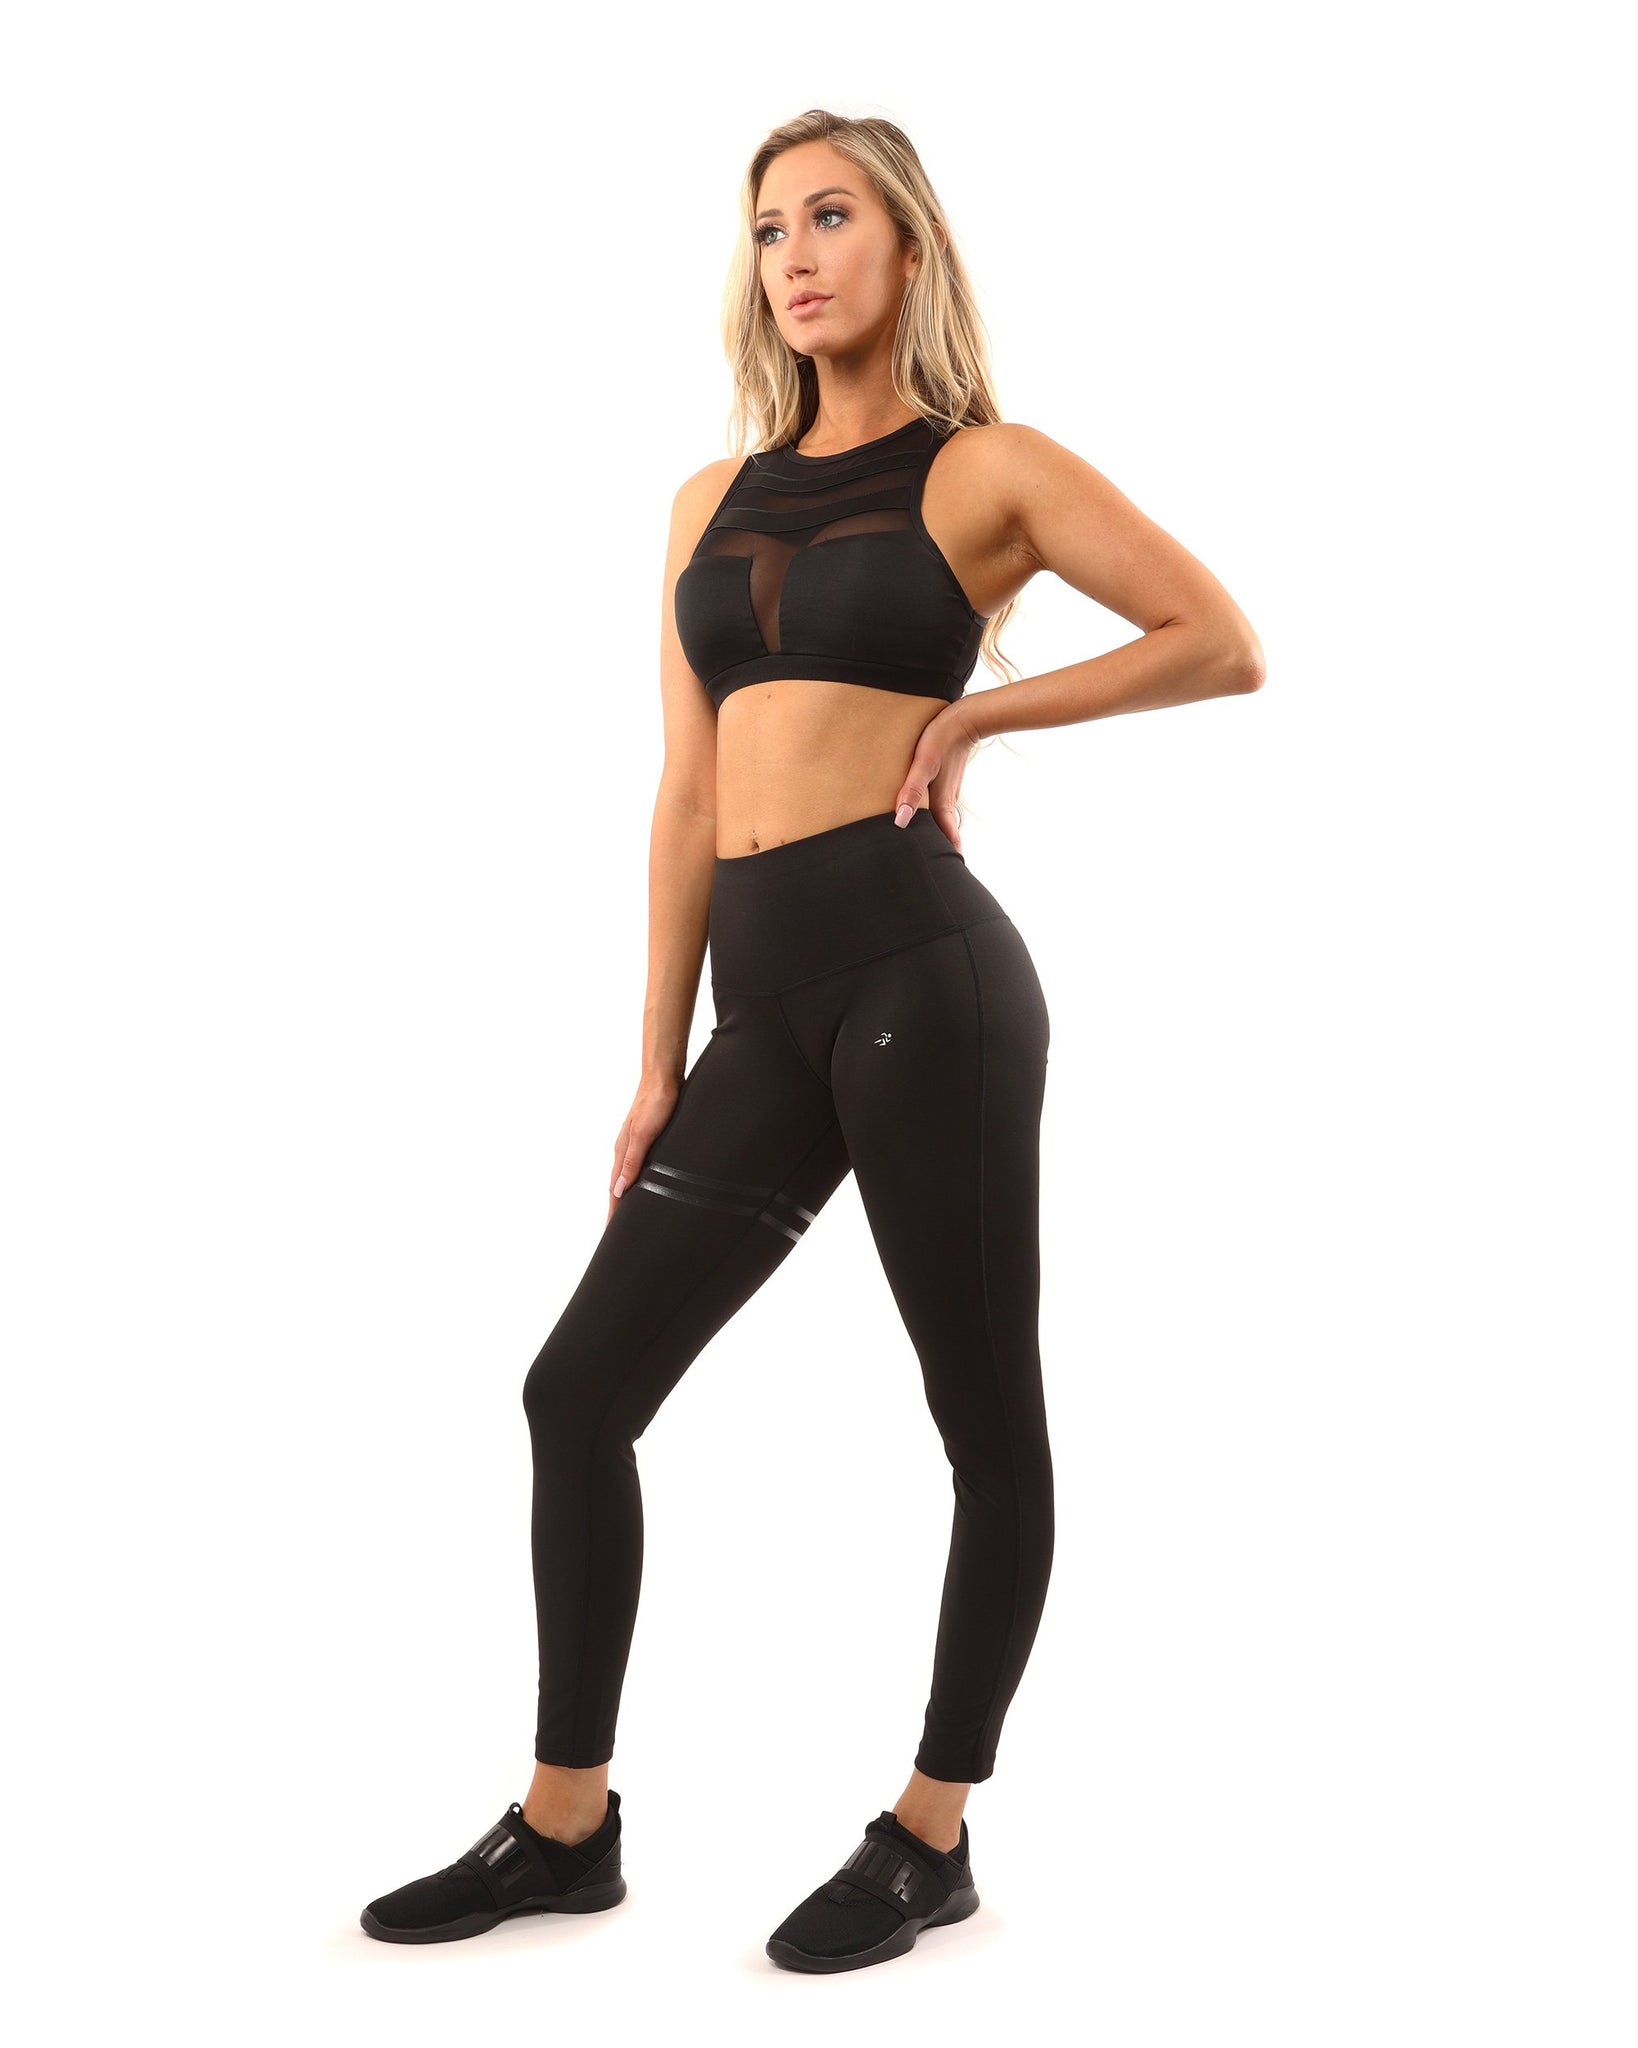 Spyder Women's Activewear On Sale Up To 90% Off Retail